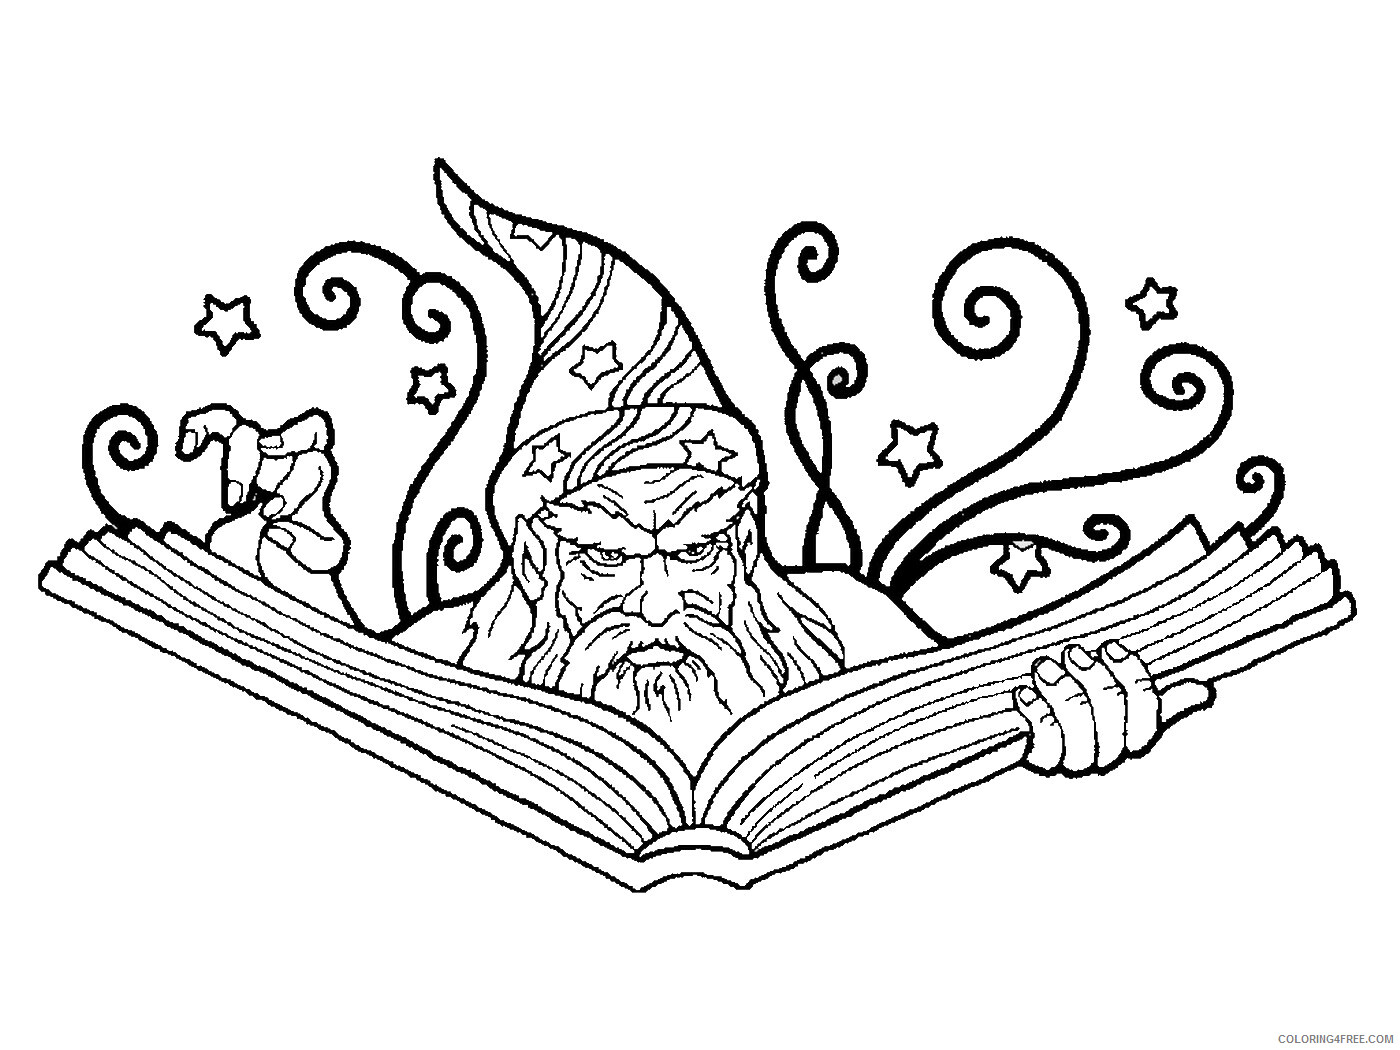 The Wizard of Oz Coloring Pages TV Film wizard_oz_25 Printable 2020 09876 Coloring4free